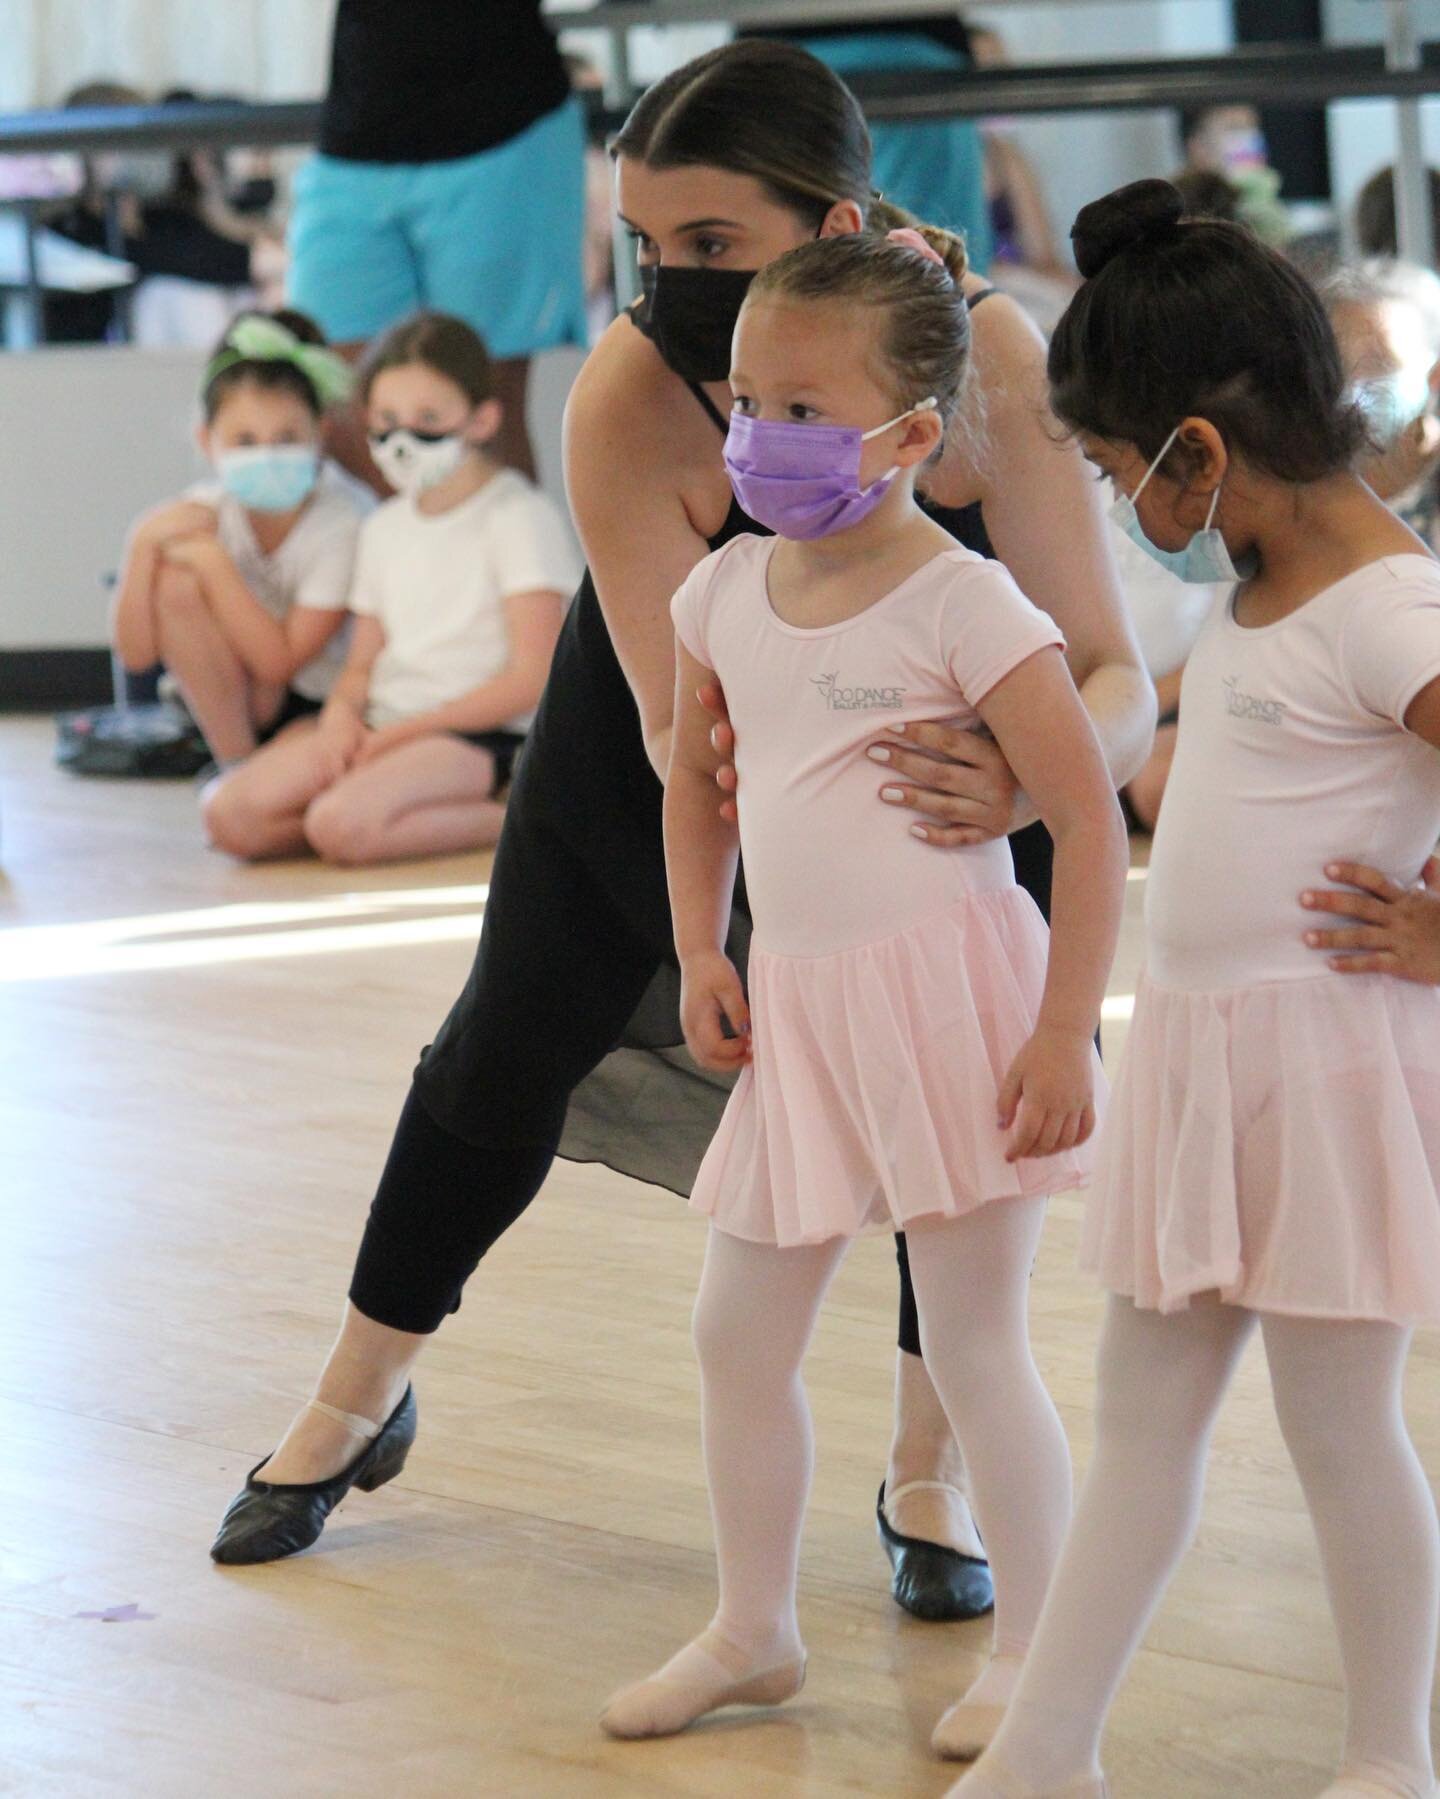 Dance gives children the freedom to express and channel their emotions into movements in a safe environment, and the support they get from our teachers will increase their confidence and self-esteem.

Learn more how to enroll your child - admin@dodan